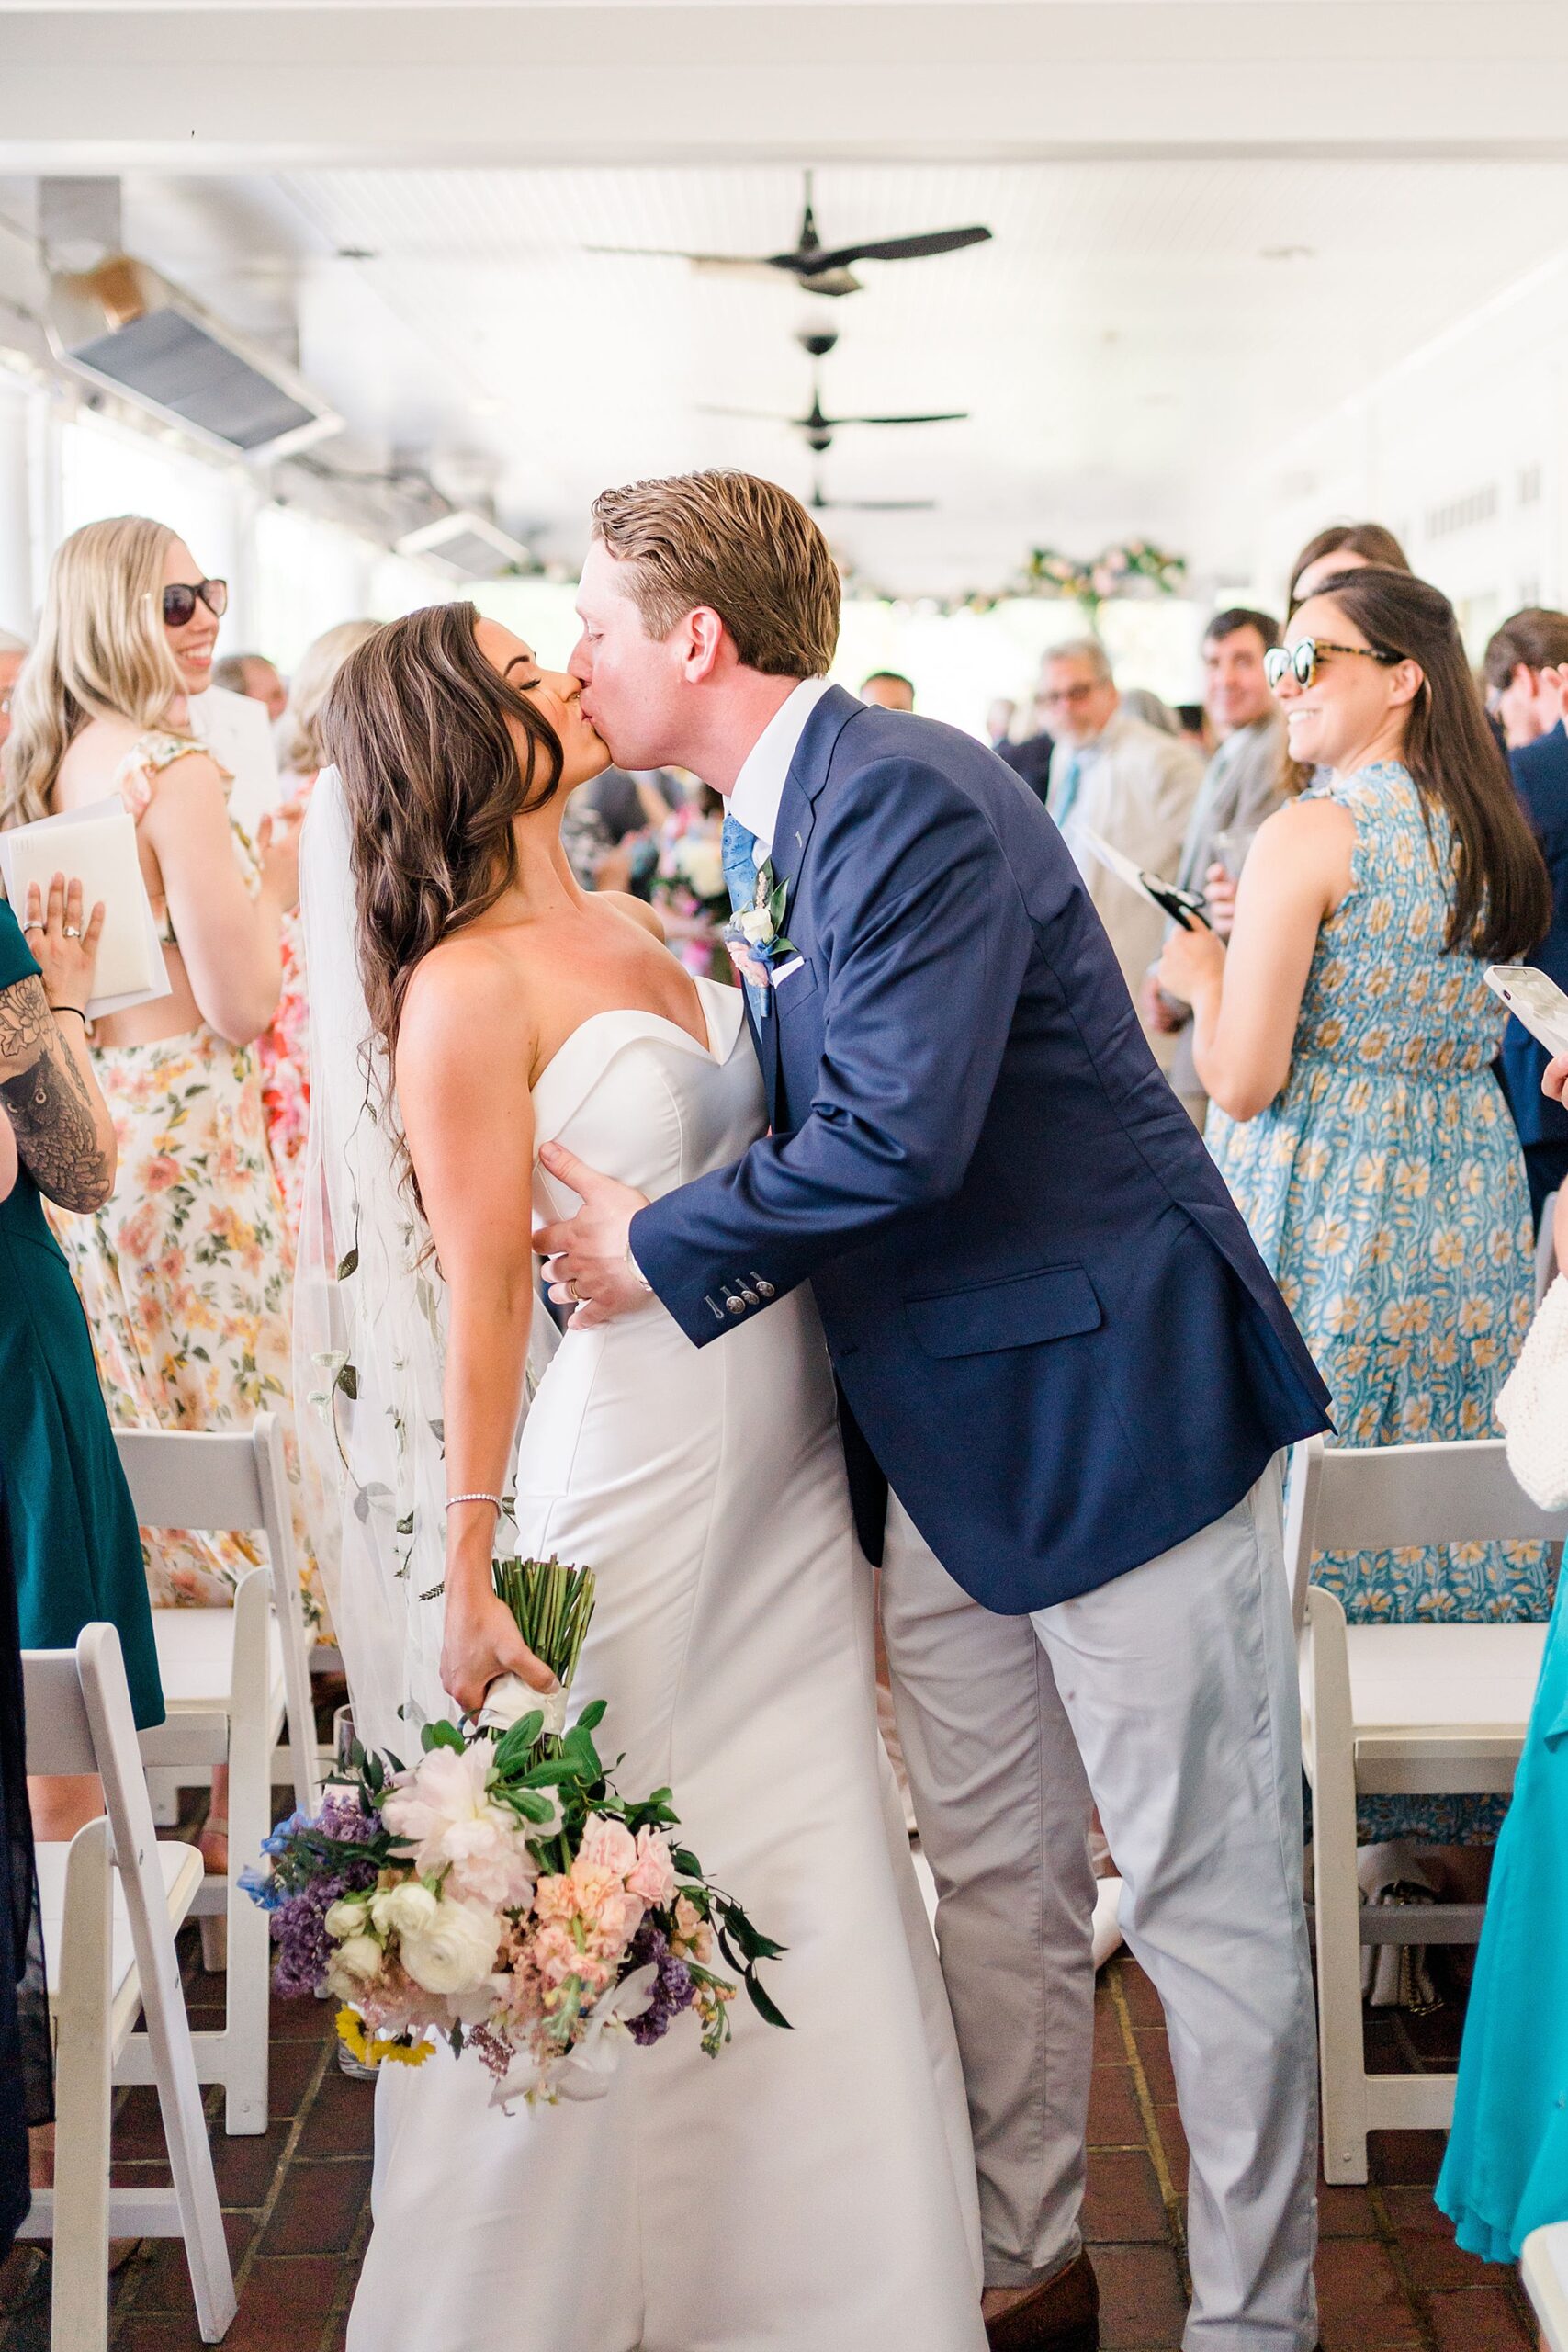 newlyweds kiss as they walk down the aisle together as husband and wife